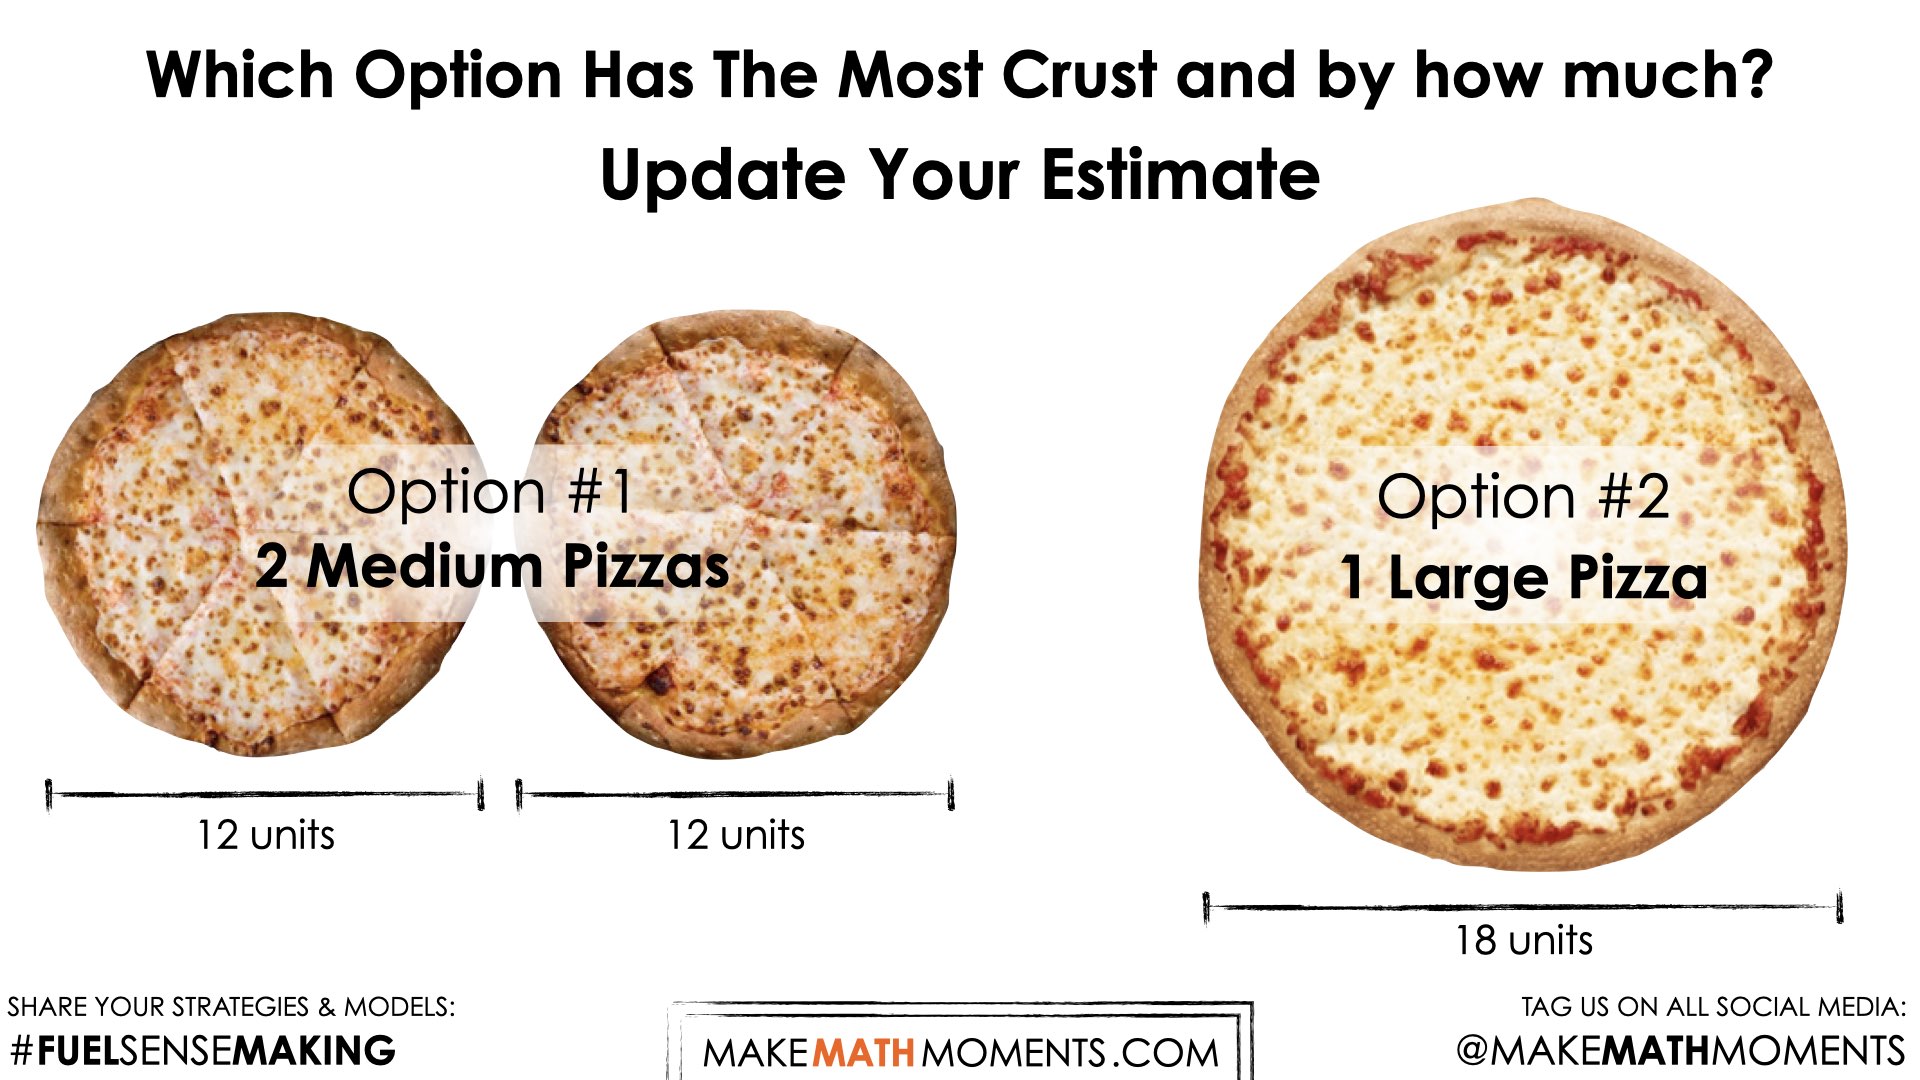 Going-In-Circles-Day-4-04-Spark-Update-Estimate-Image-How-much-more-crust.jpeg.001.jpeg